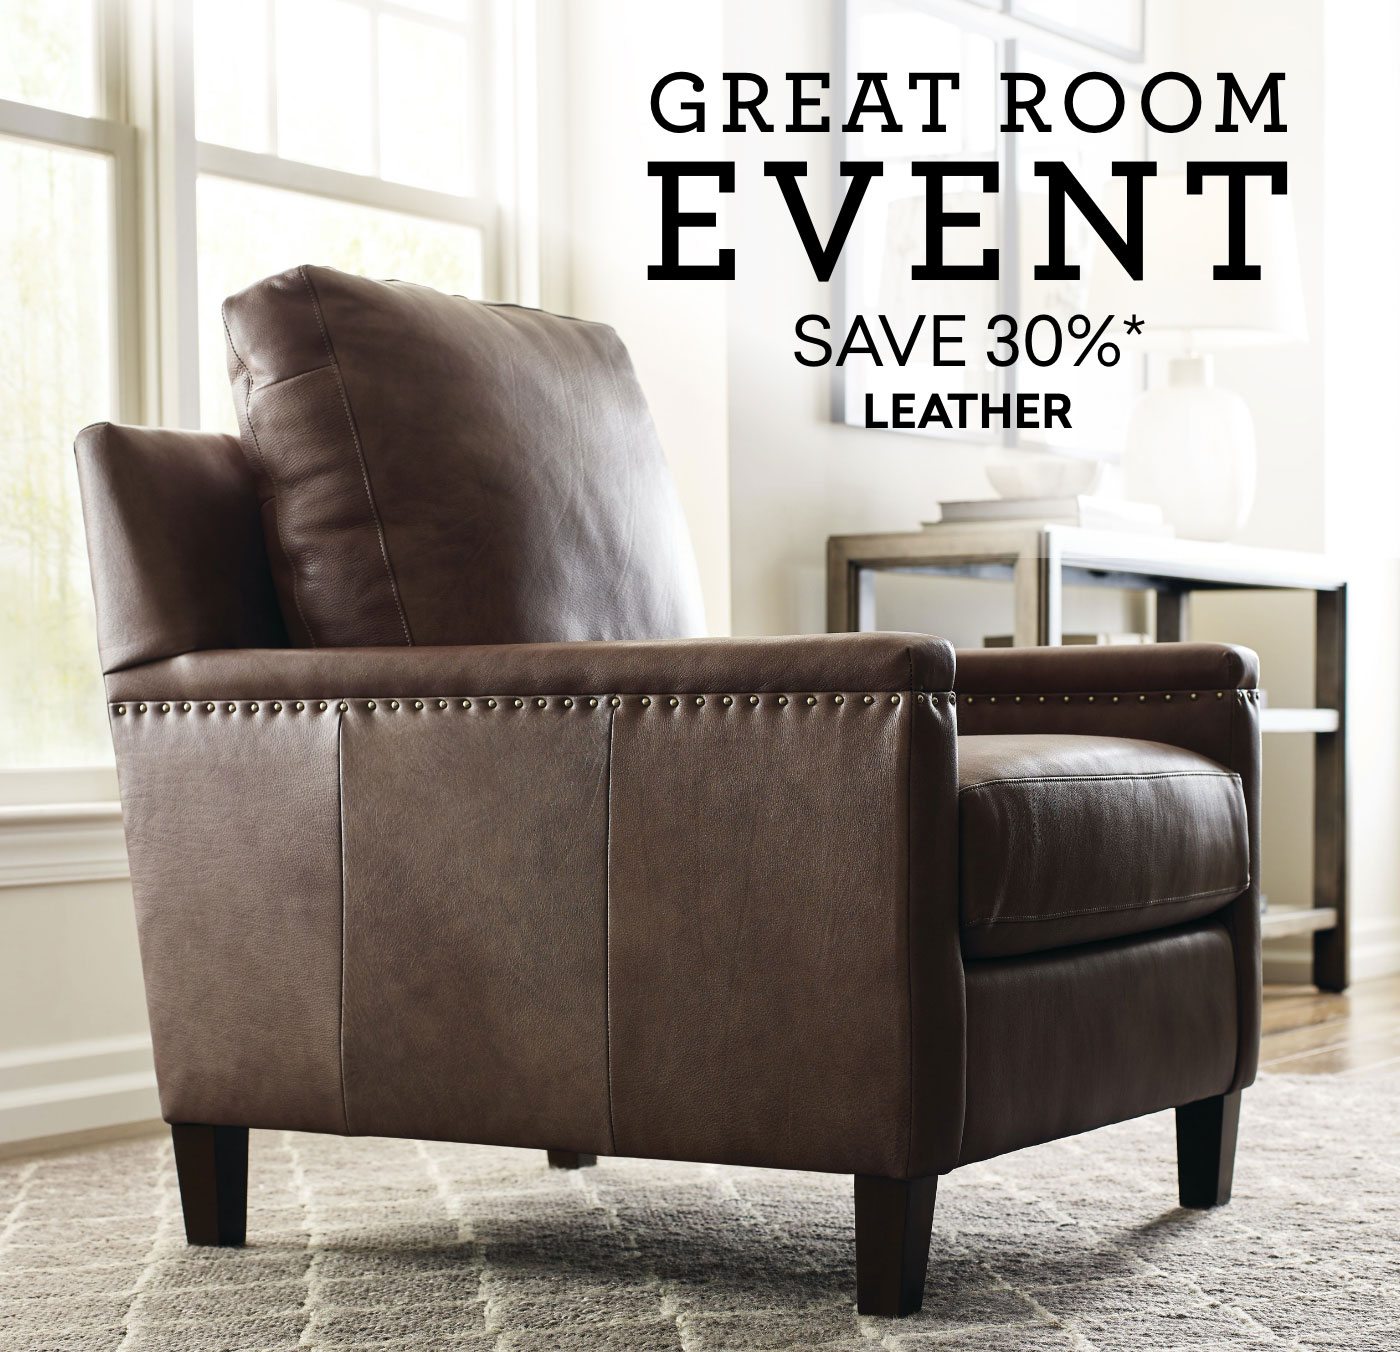 Great Room Event. 30% off leather. Shop now.